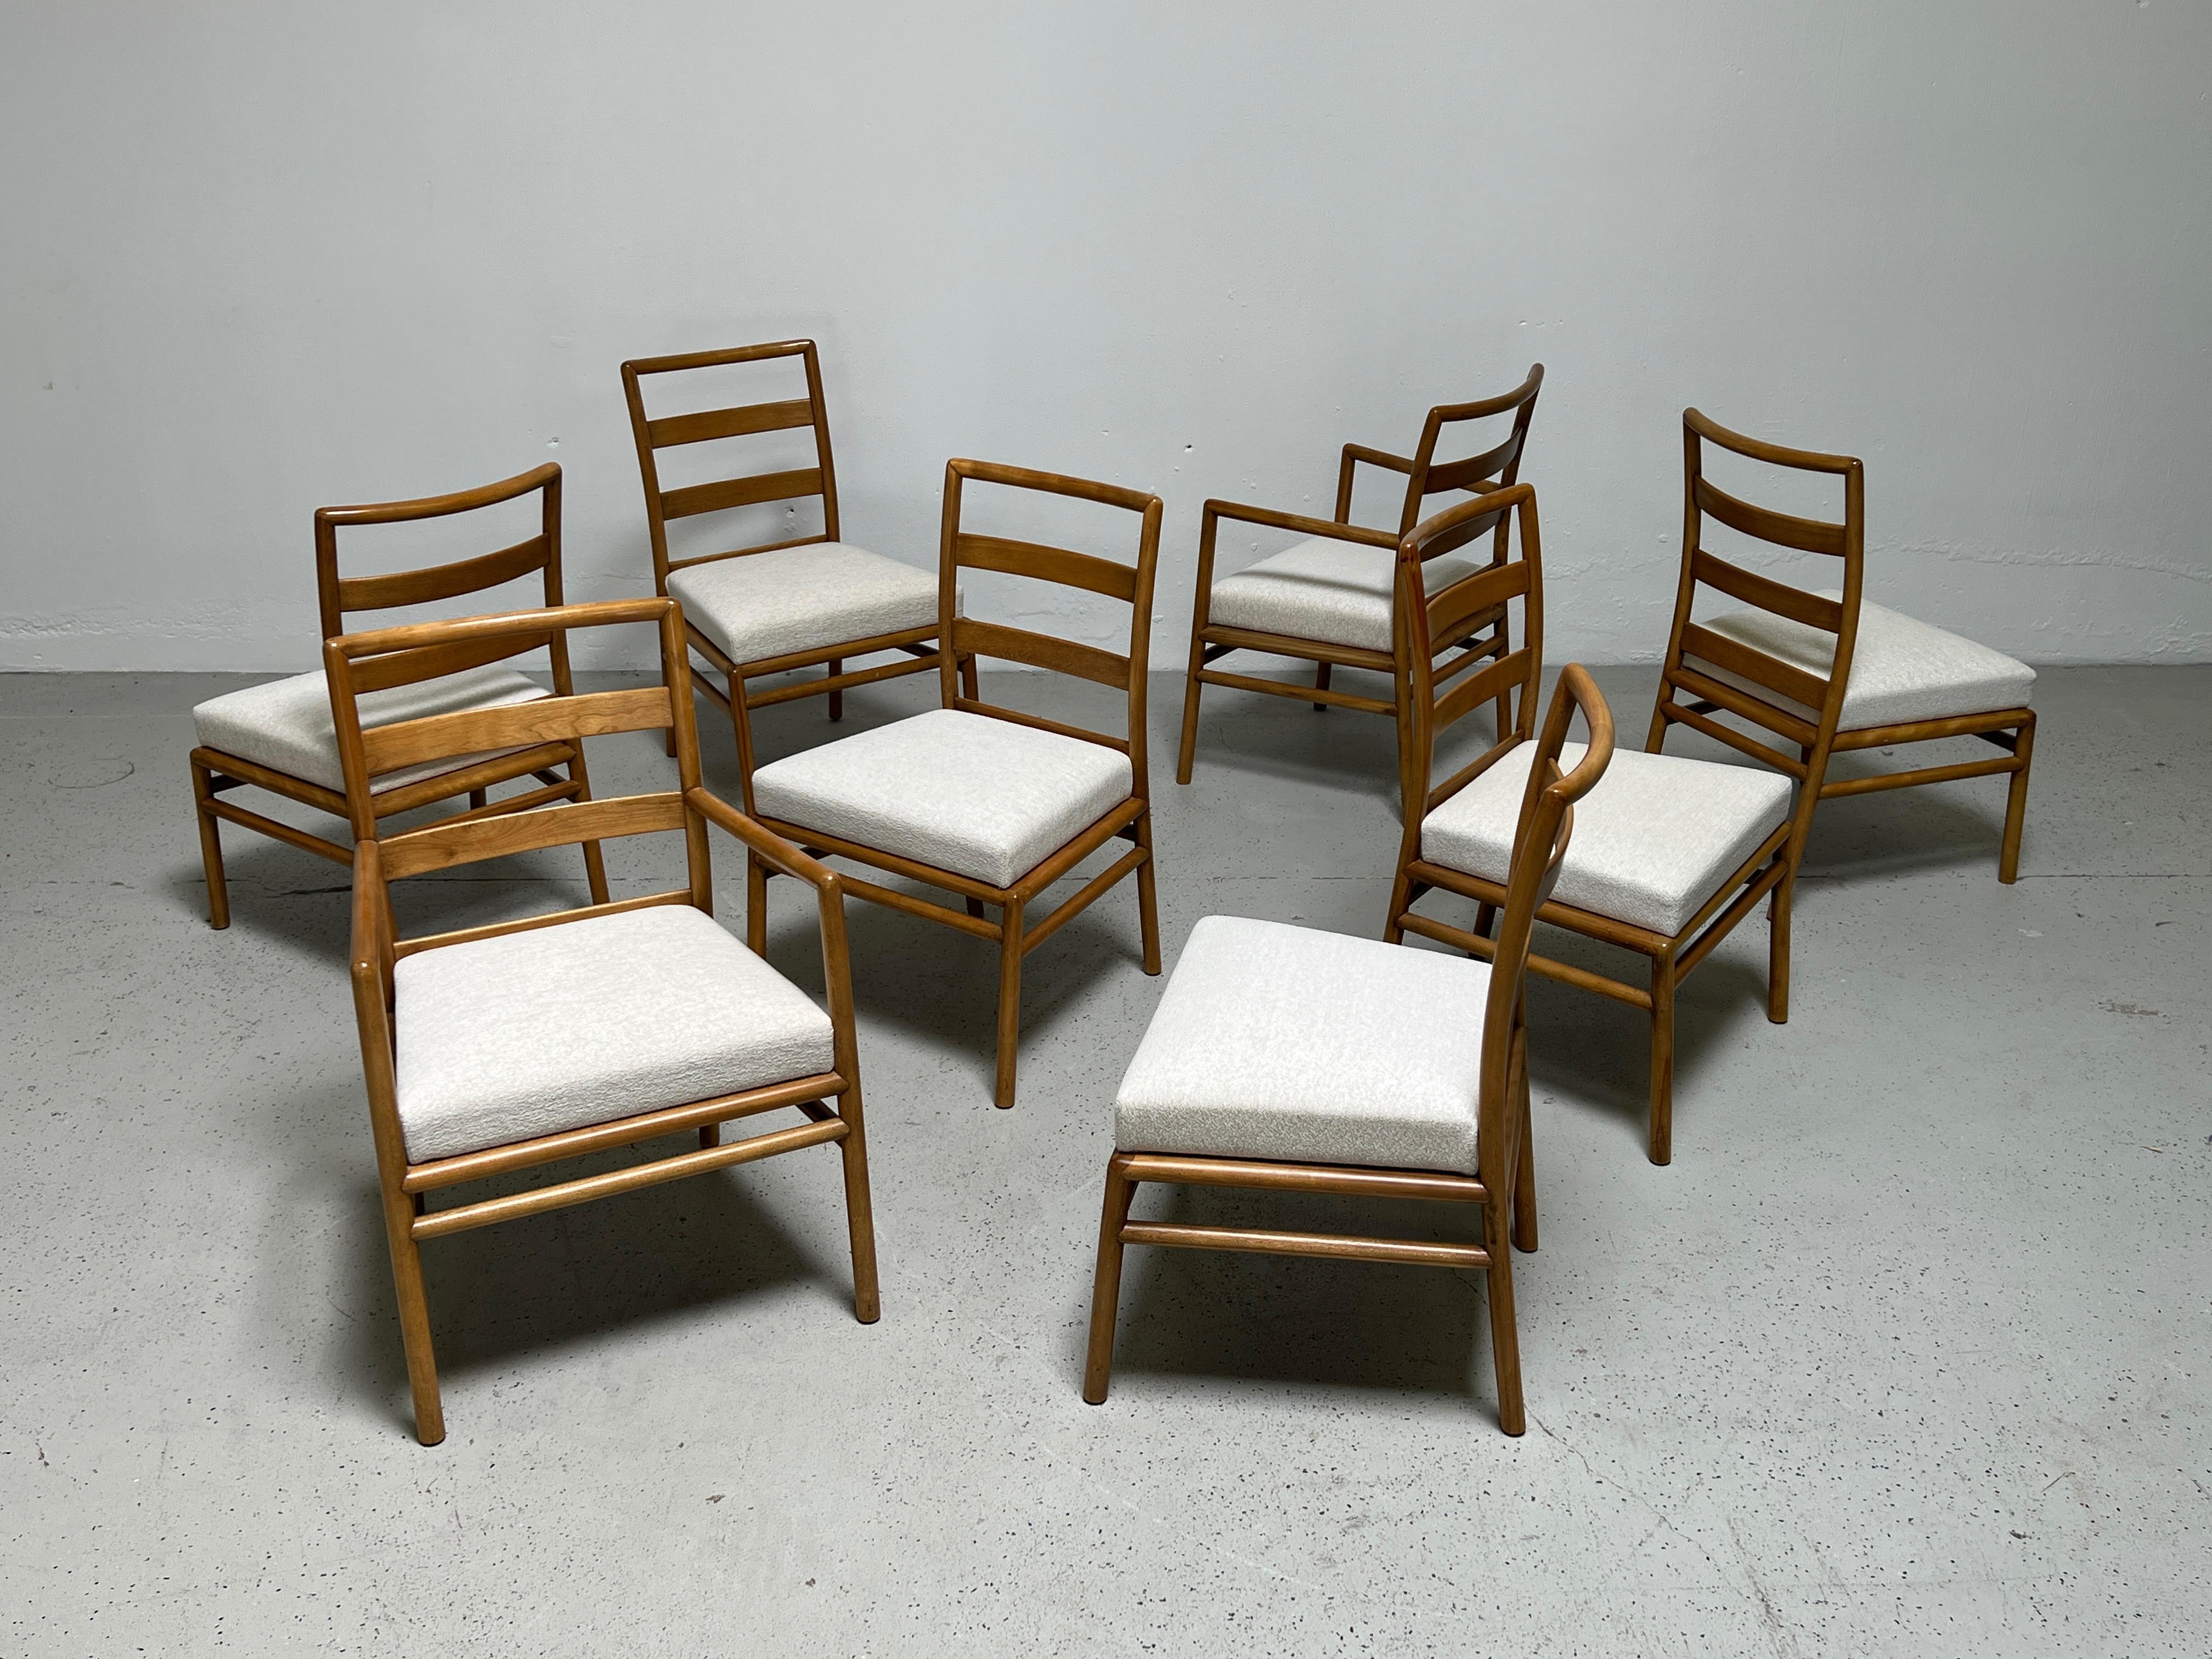 A bleached walnut dining table and eight chairs designed by 
T.H. Robsjohn-Gibbings for Widdicomb. The table measures 92